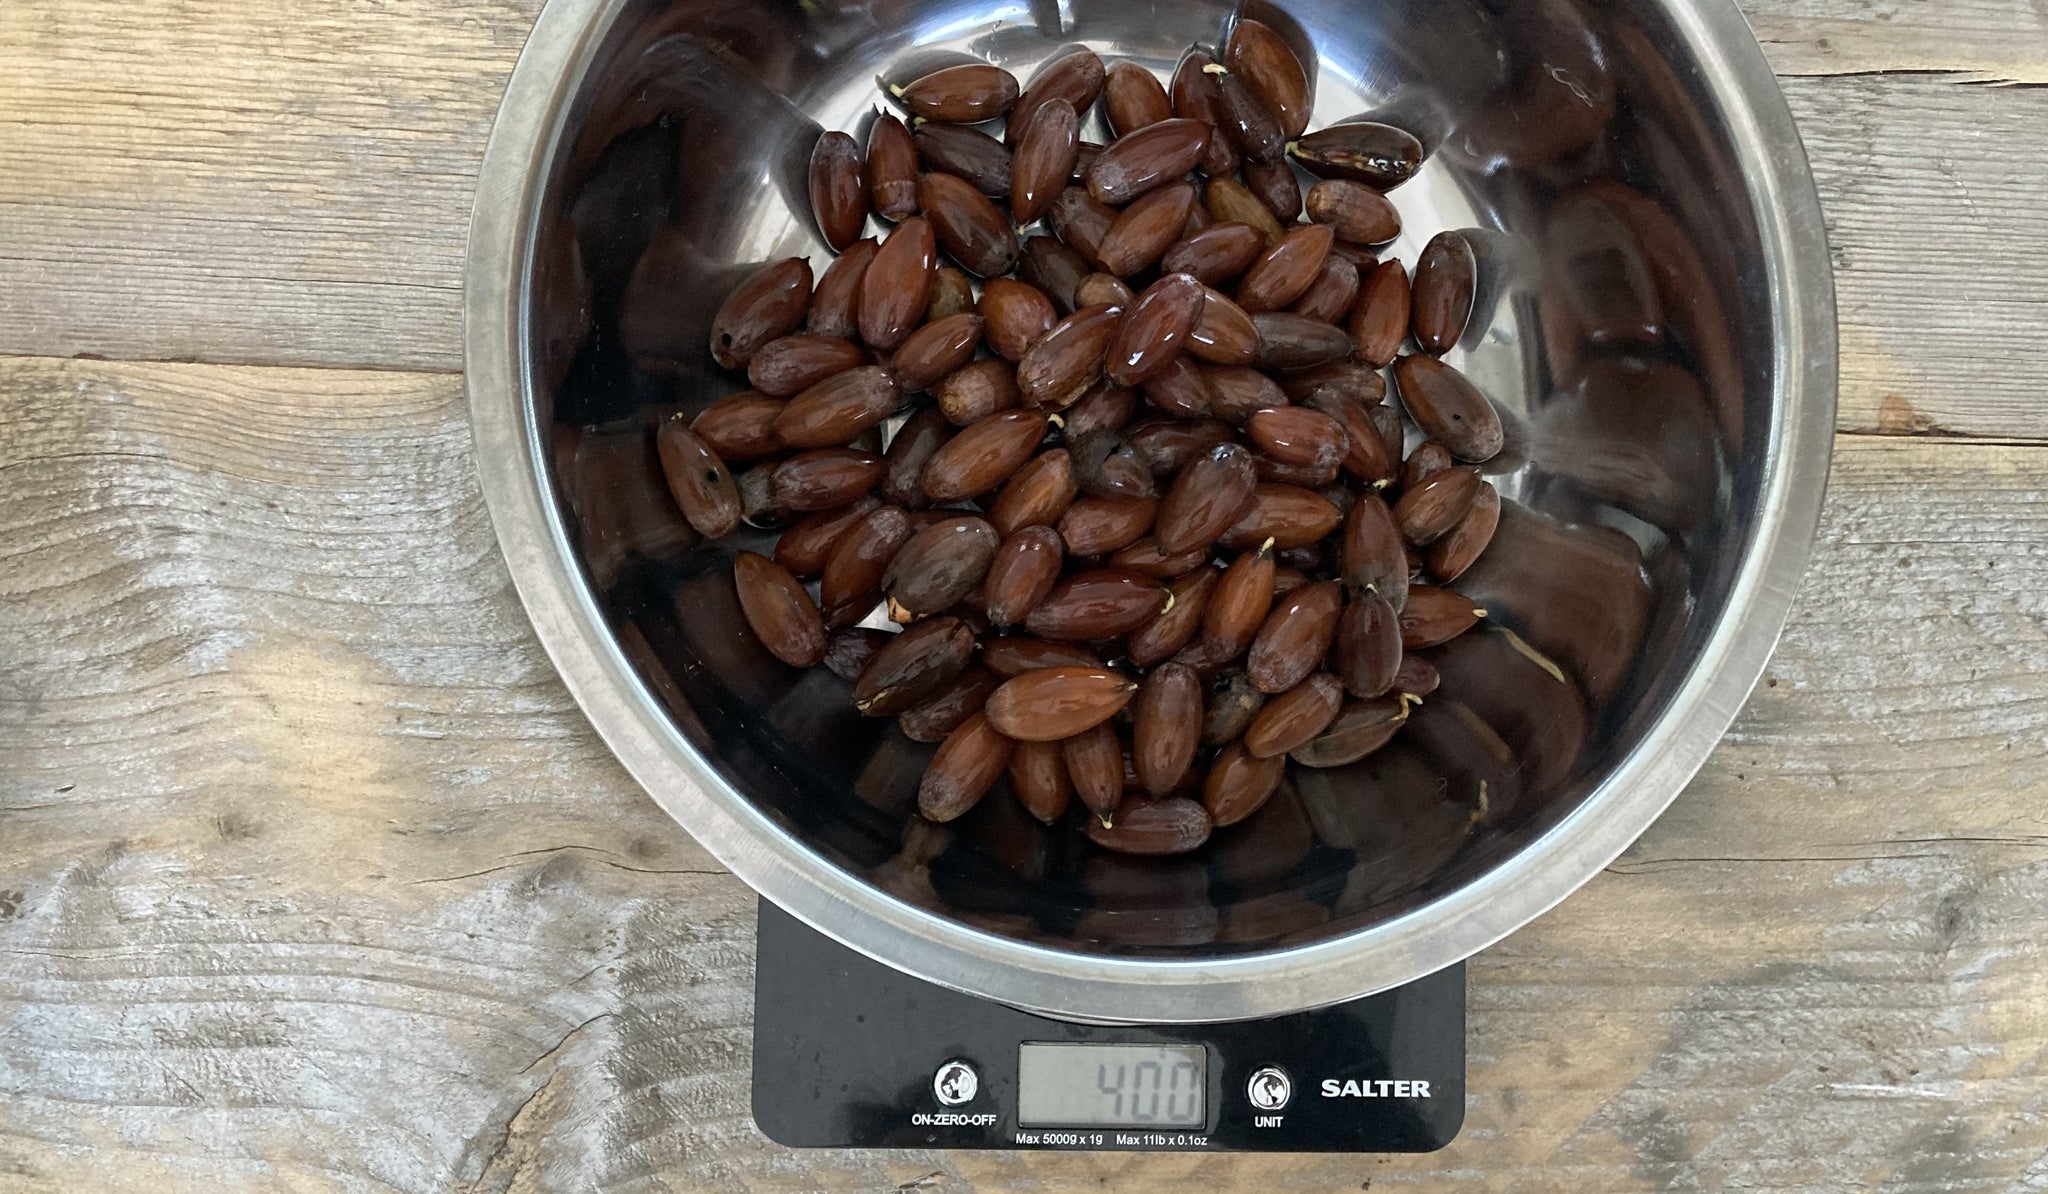 Acorns in a metal bowl being weighed on a set of scales